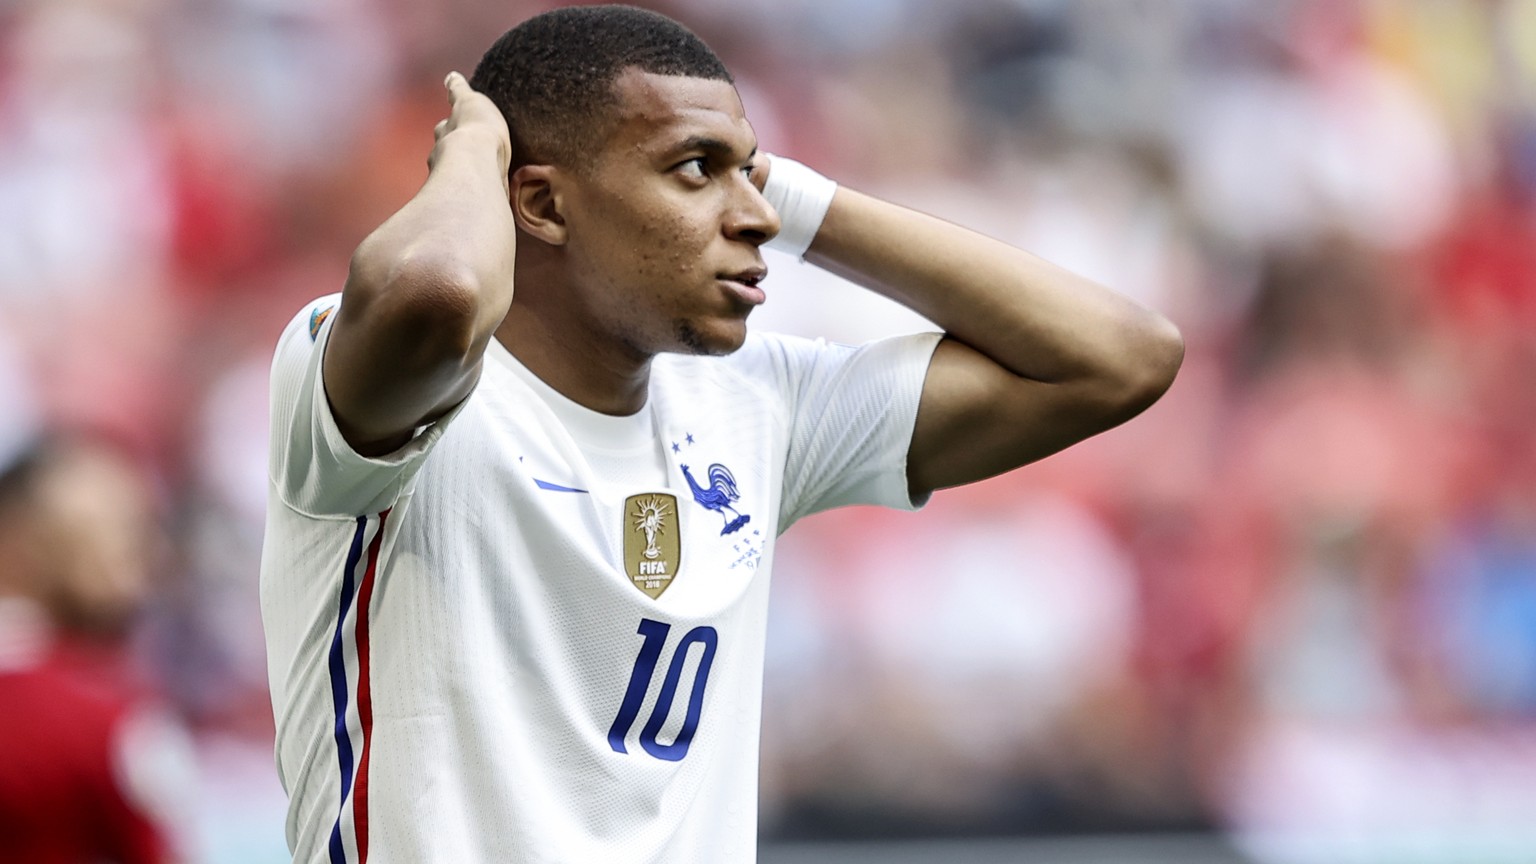 France's Kylian Mbappe reacts during the Euro 2020 soccer championship group F match between Hungary and France, at the Ferenc Puskas stadium, in Budapest, Saturday, June 19, 2021. (Alex Pantling, Poo ...